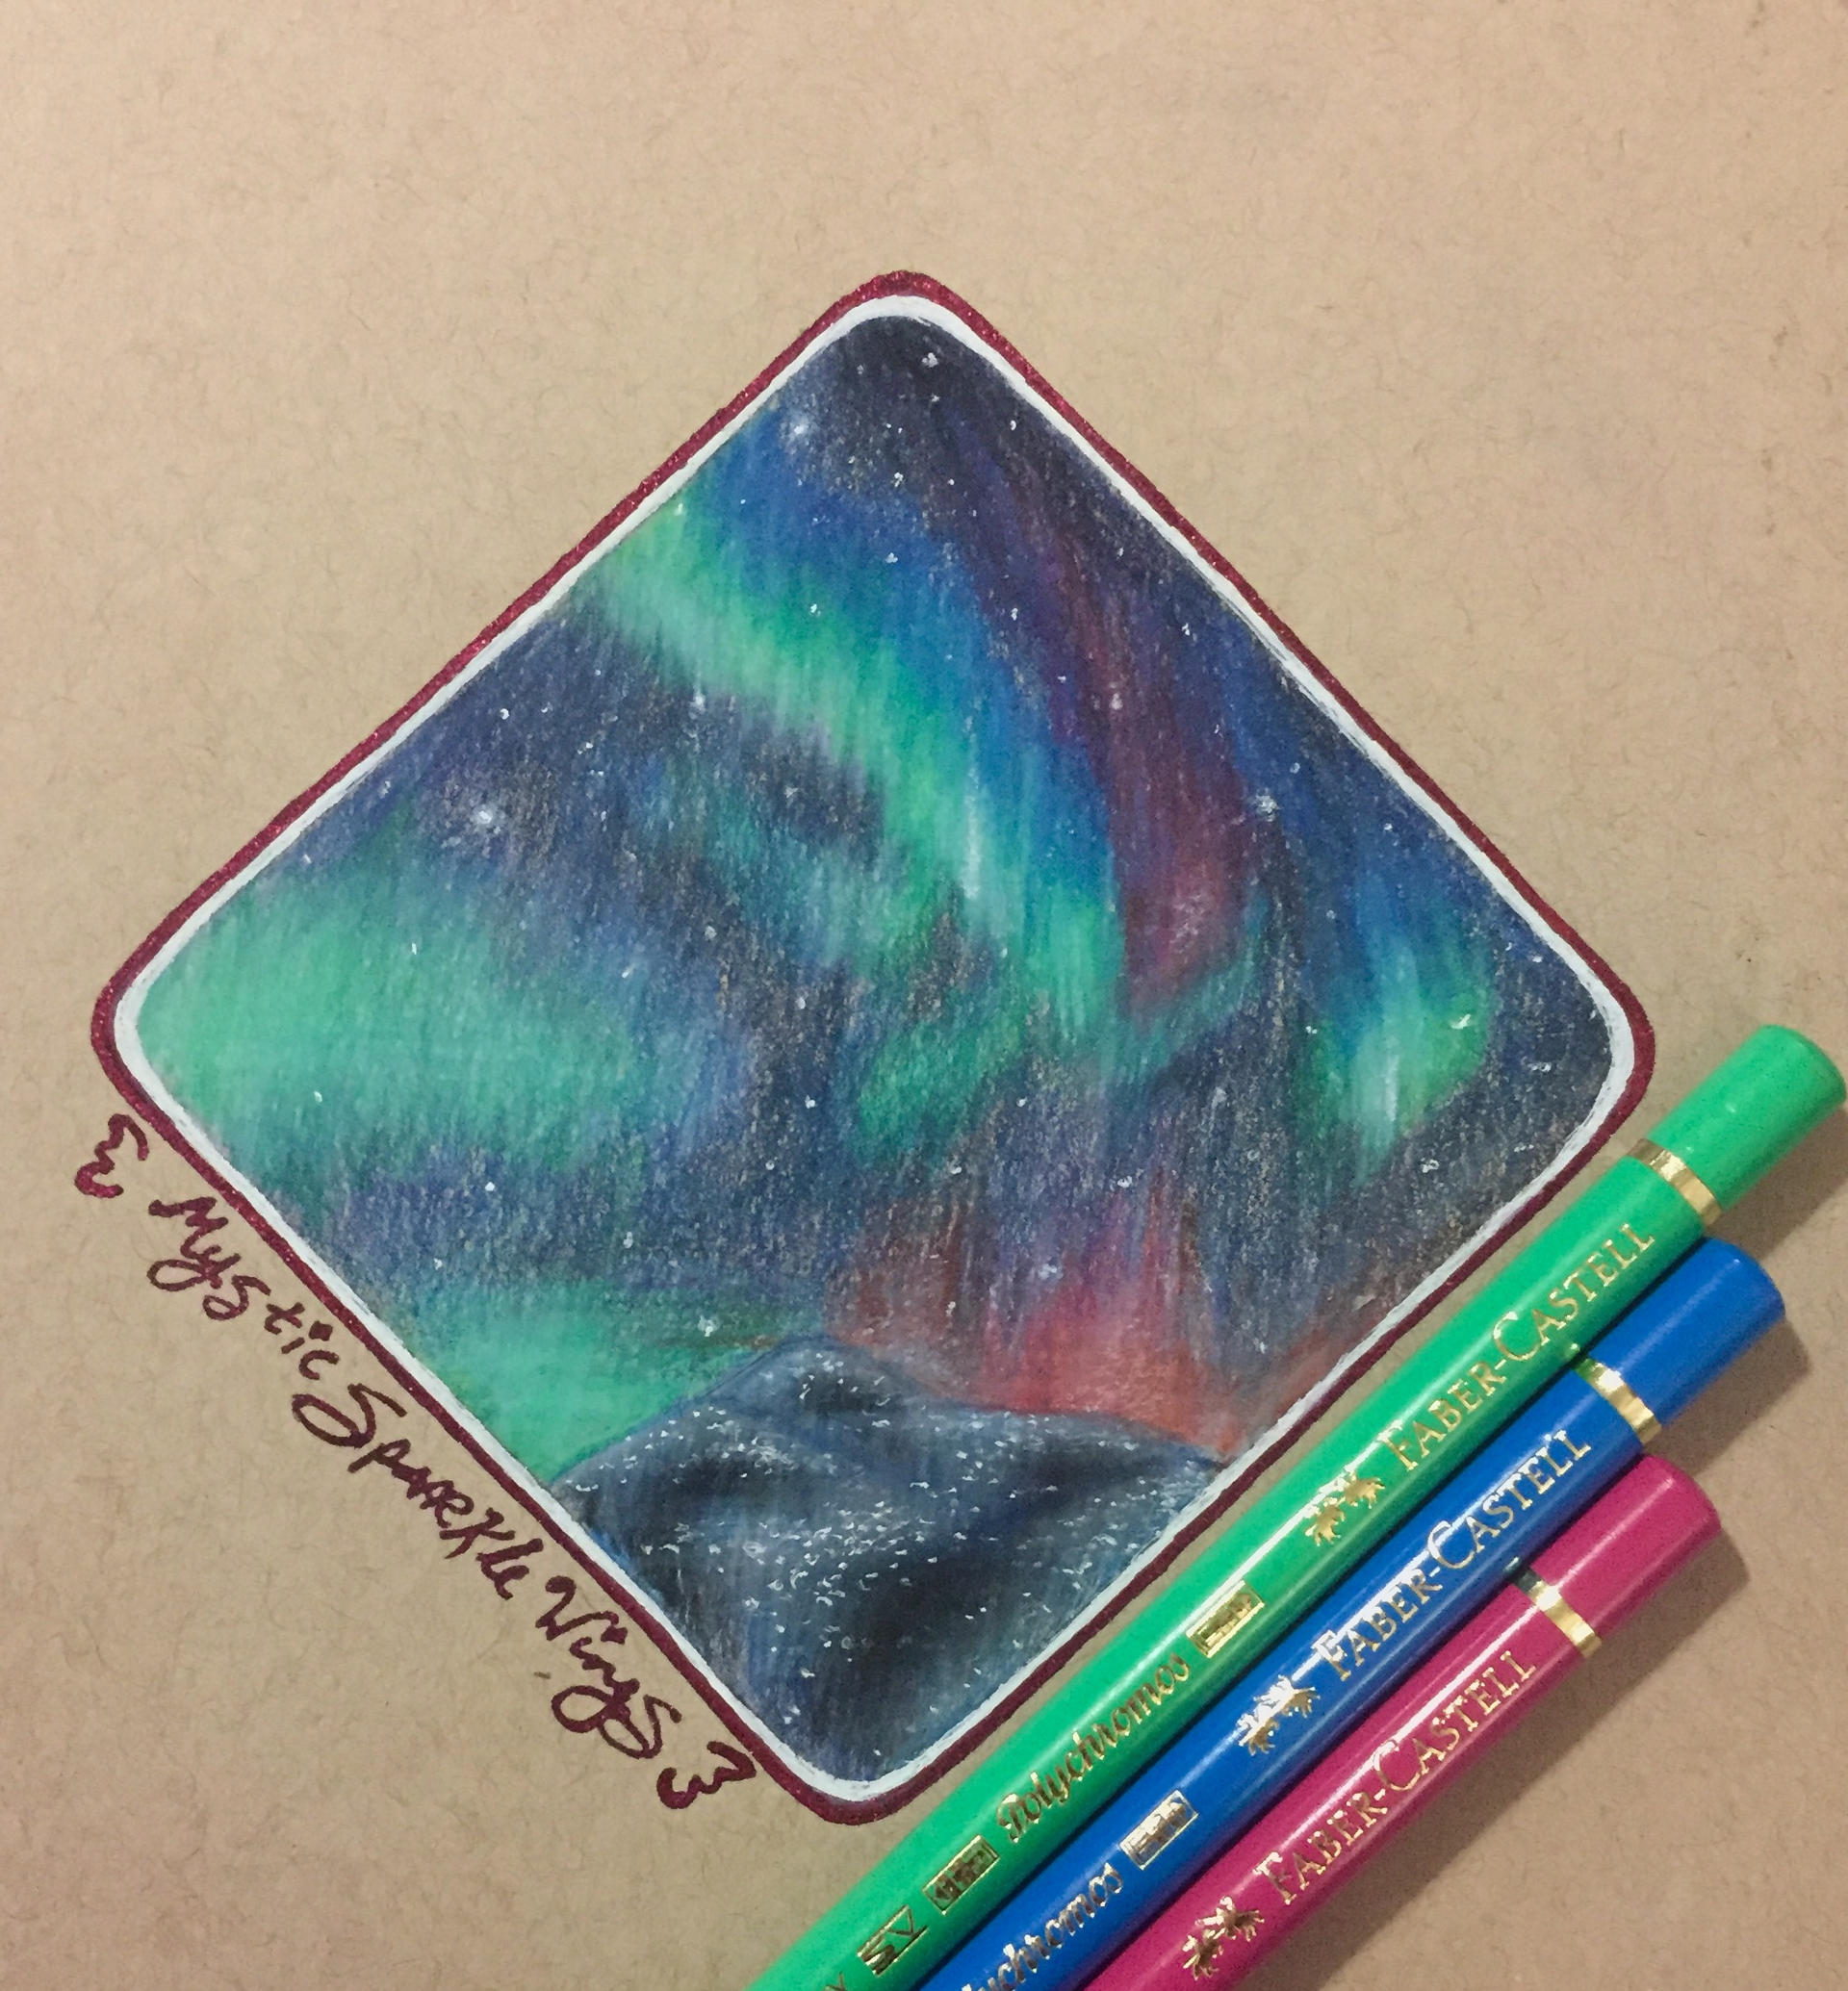 Faber Castell Polychromos First Impressions by MysticSparkleWings